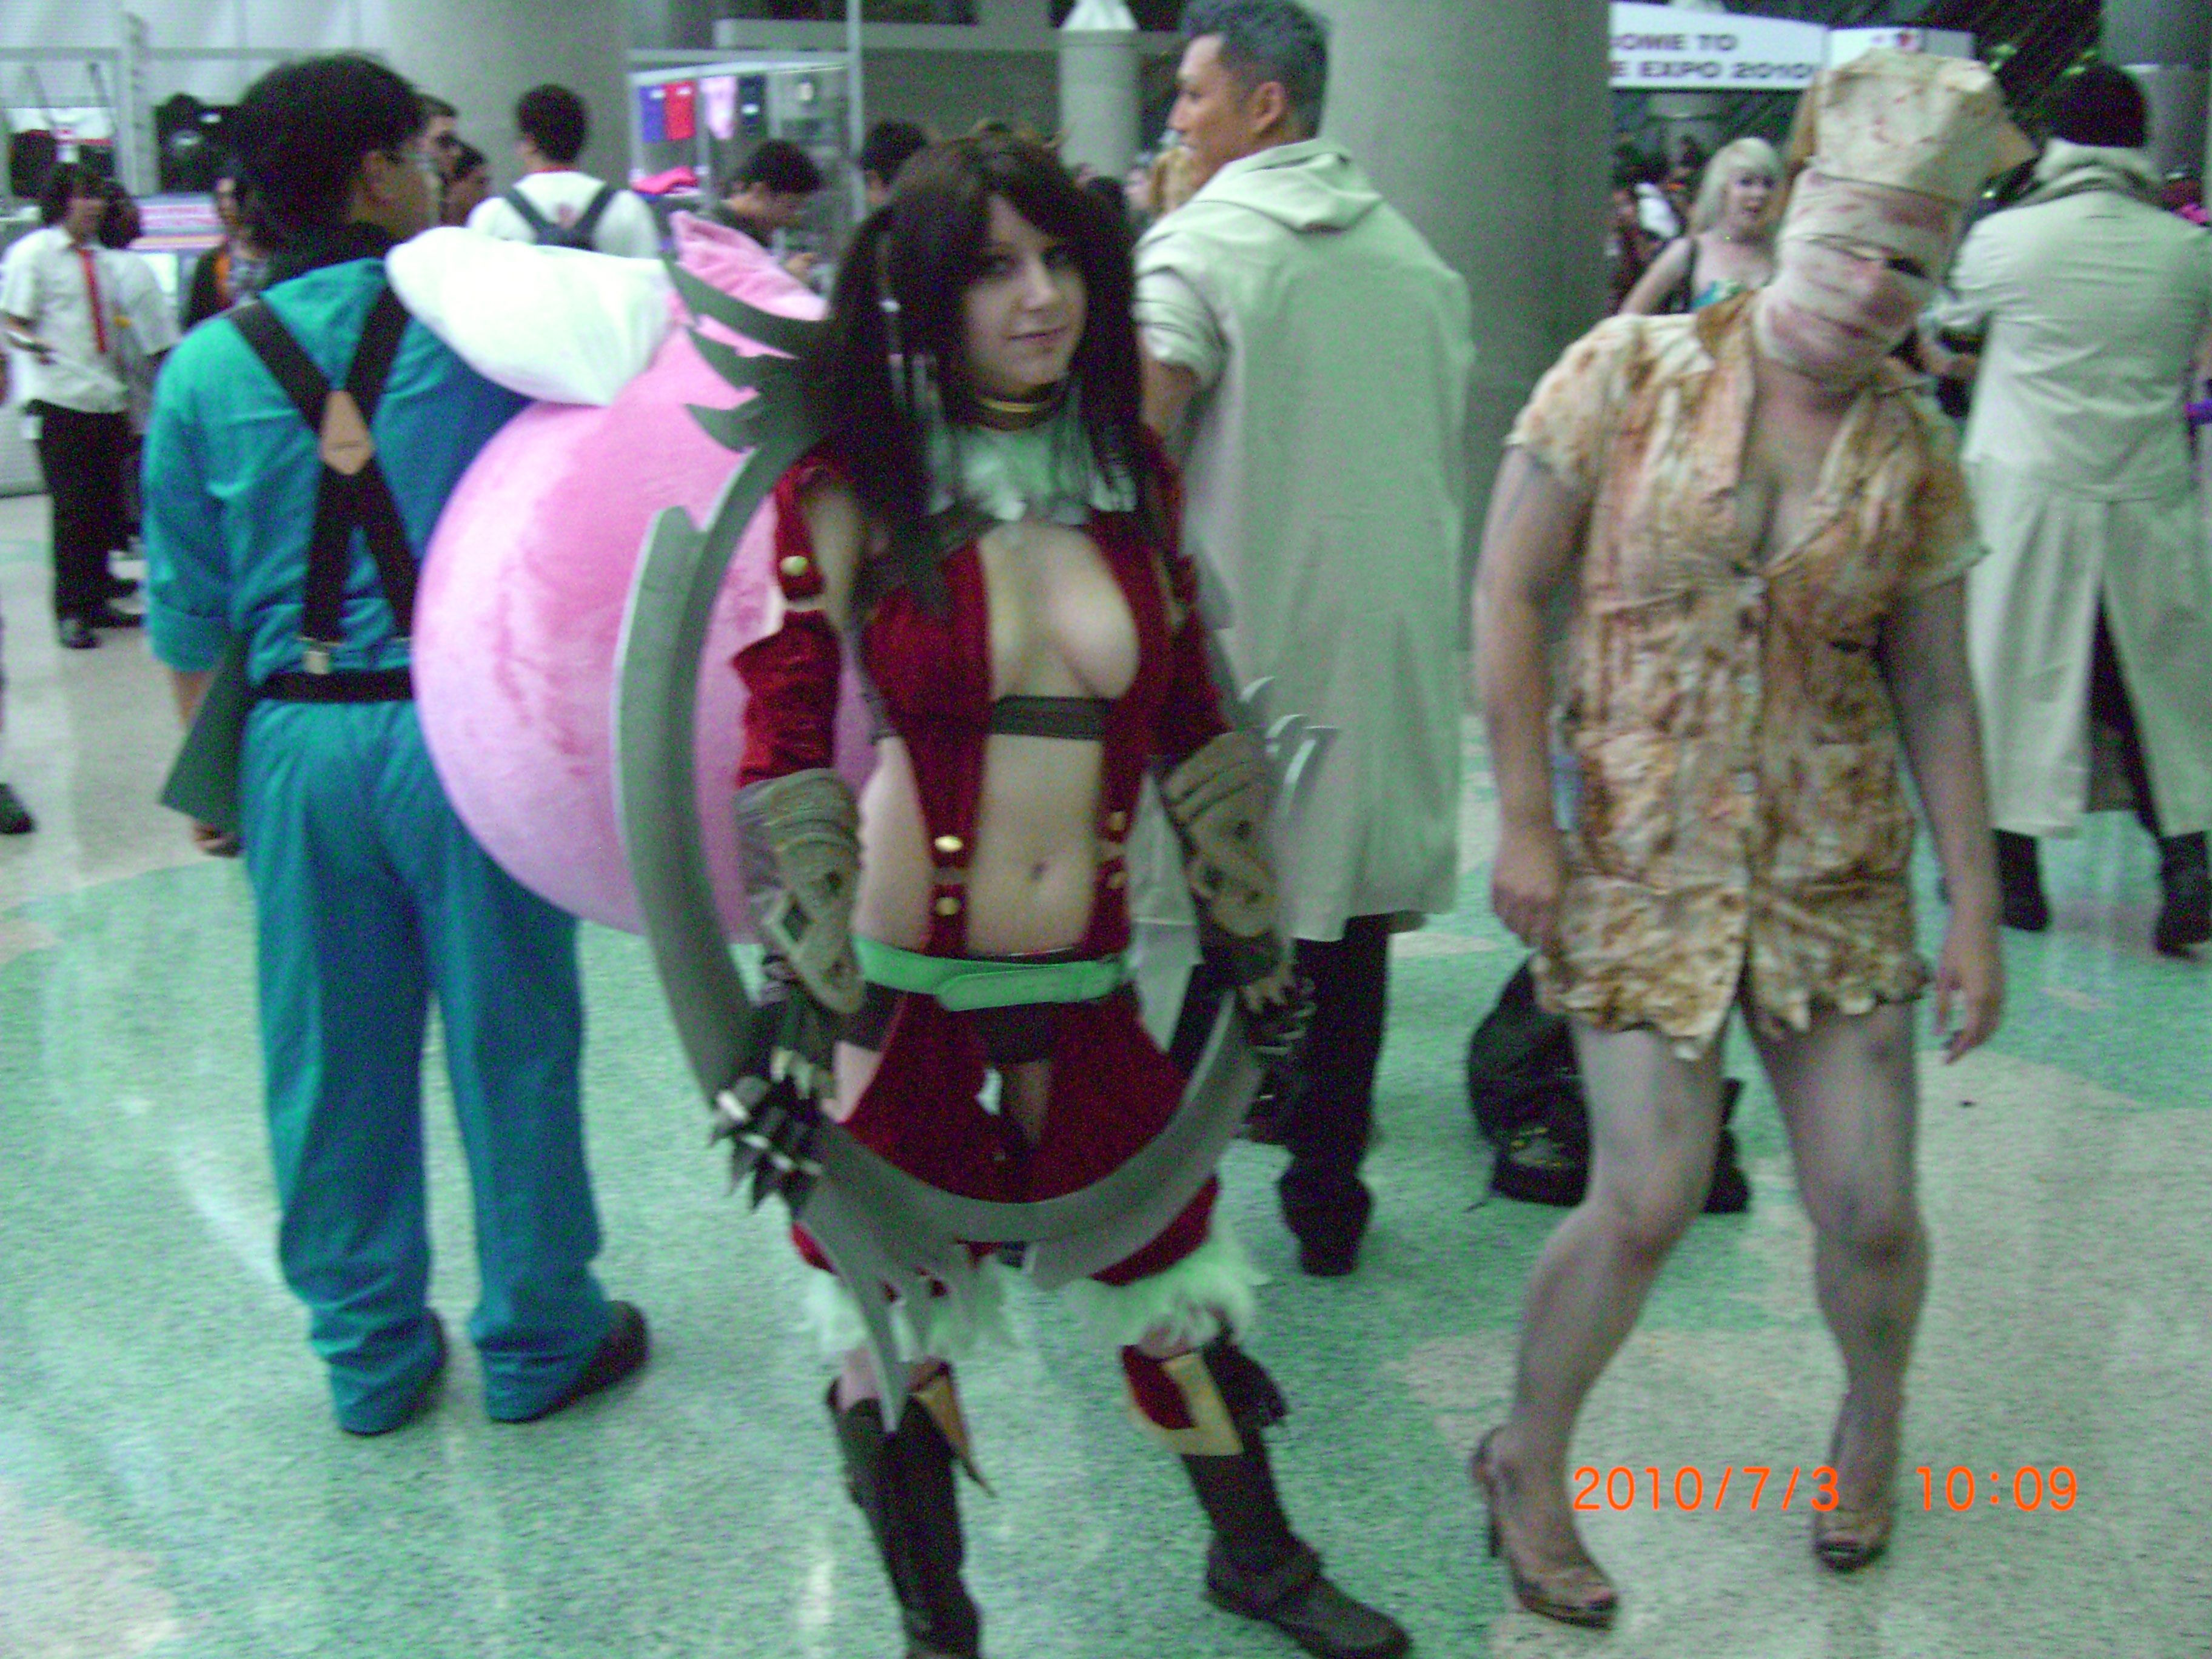 Cosplay convention sex Adult hot photos free site. Comments: 1